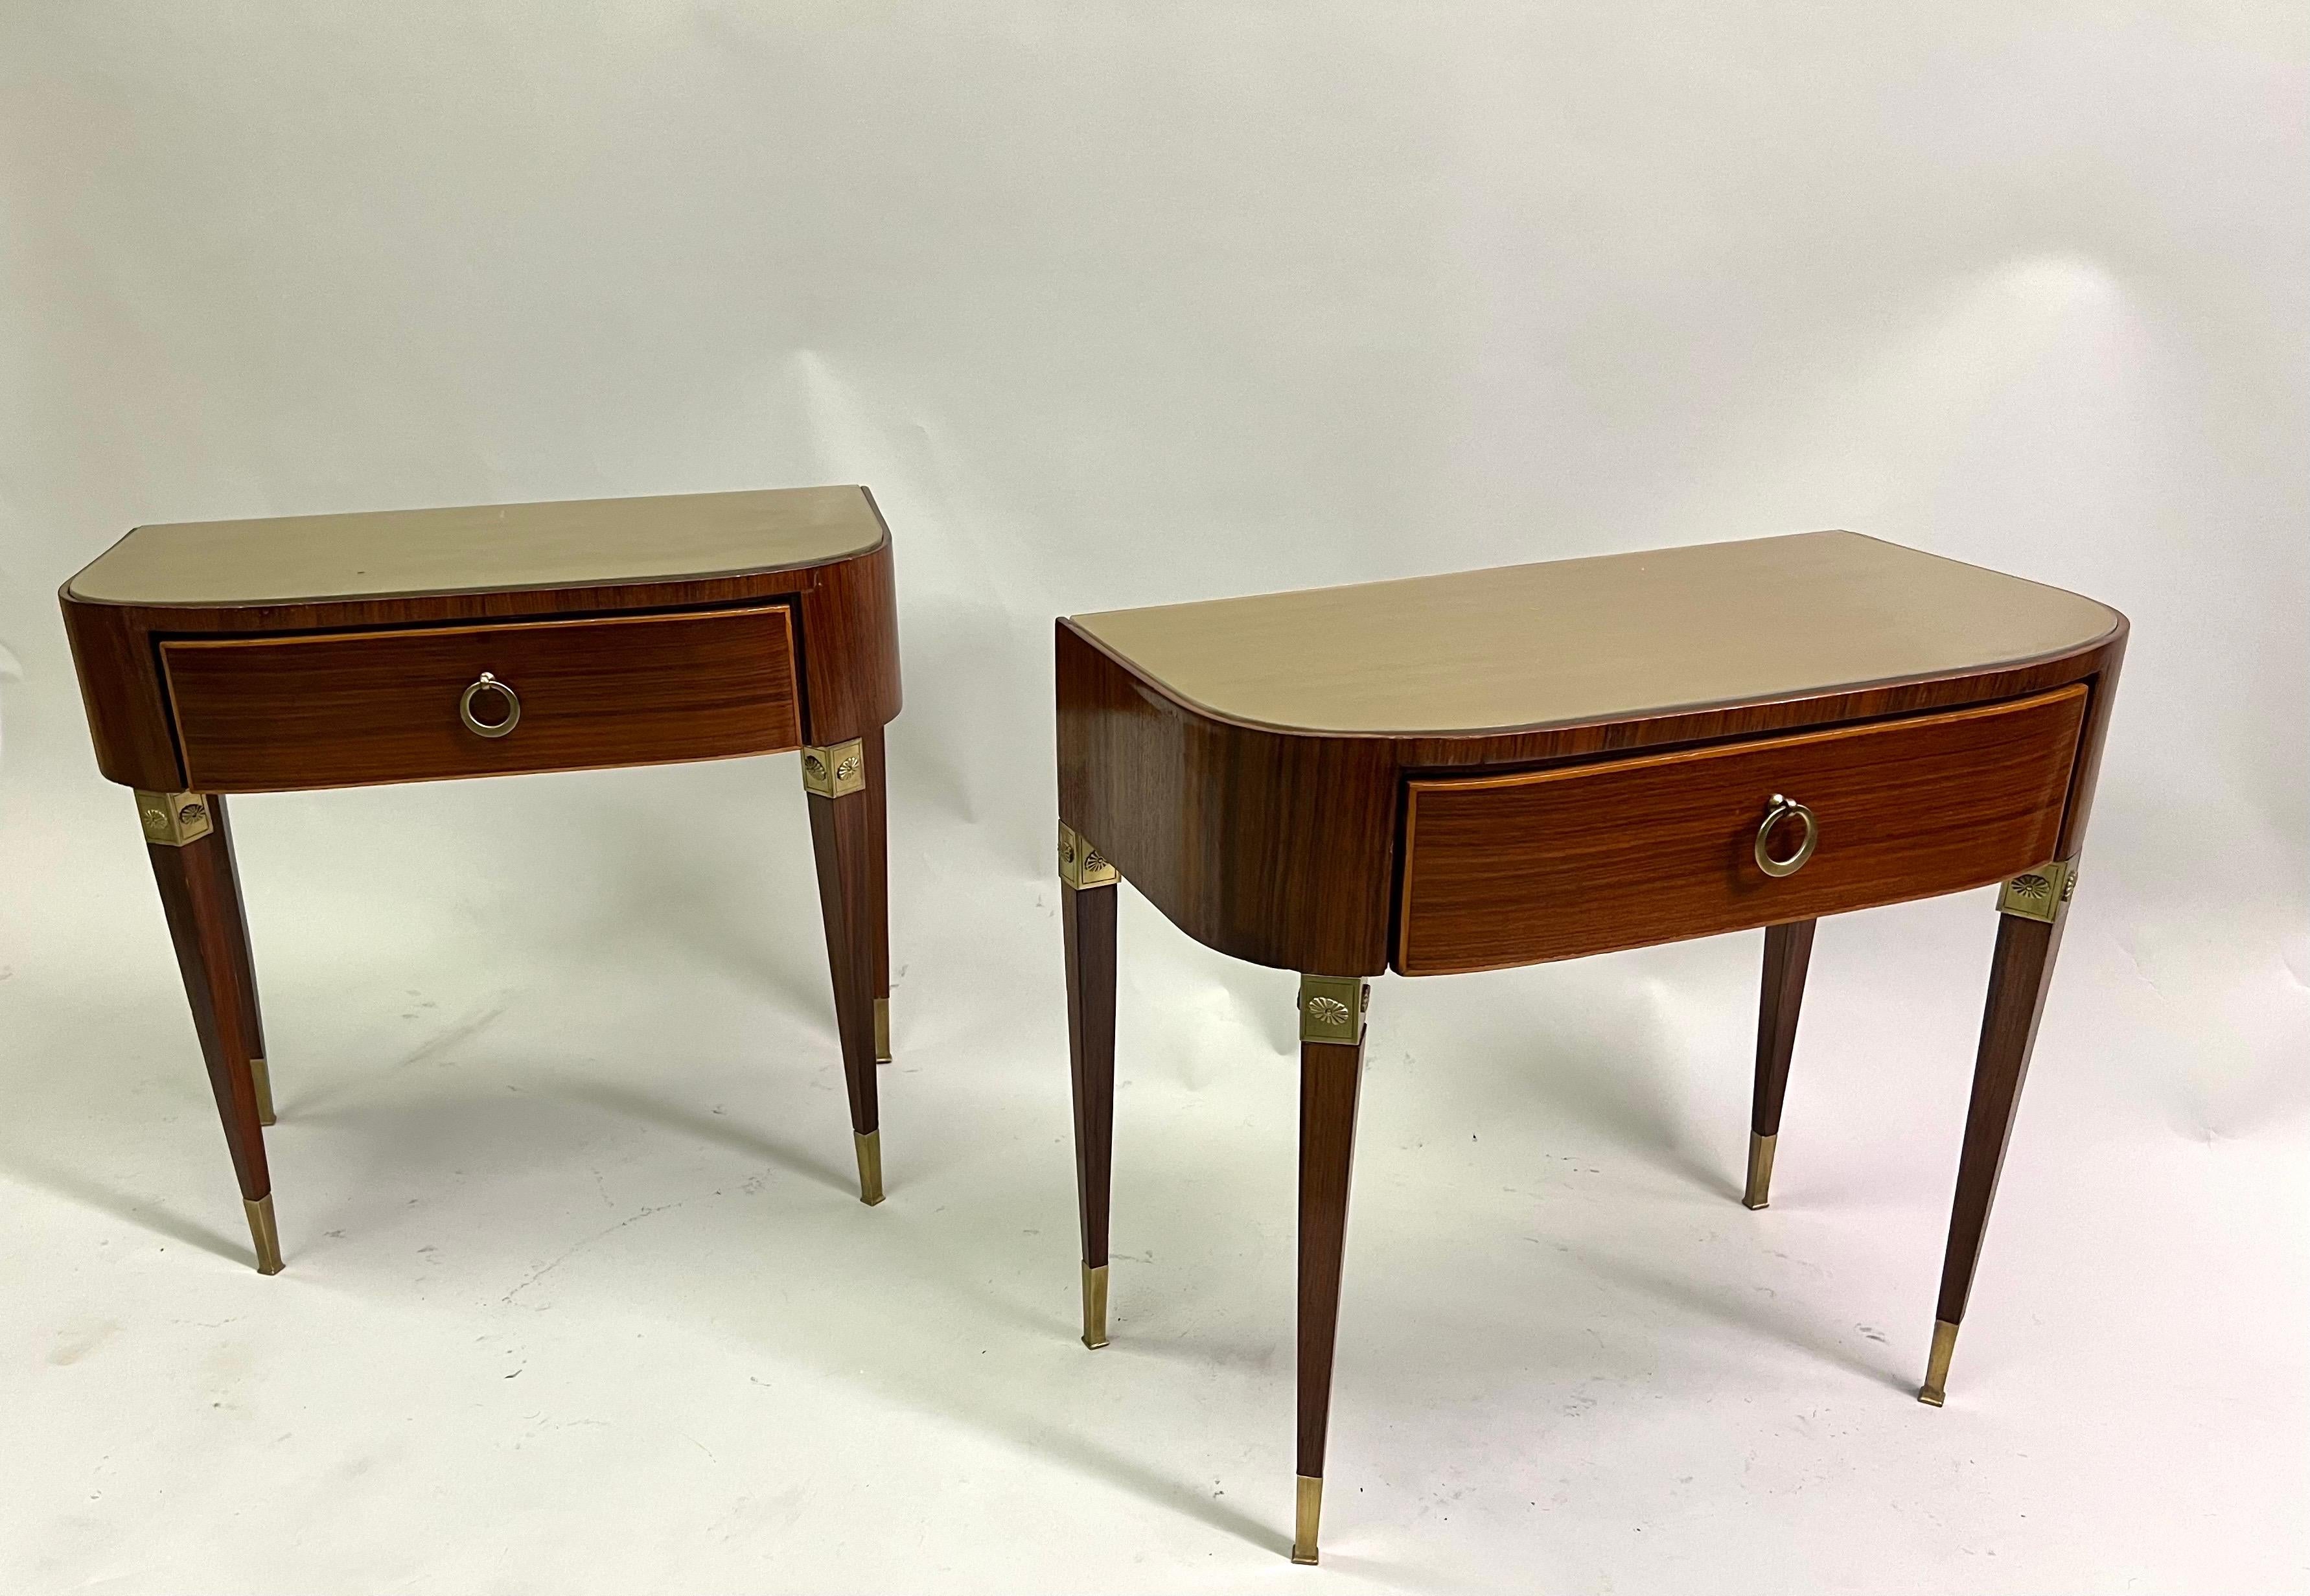 A Rare and Exceptional Pair of Italian Mid-Century Modern Neoclassical End or Side Tables / Night Stands Attributed to the Italian design master, Gio Ponti. The tables are incomparable in their pure style, elegant lines and form, combination of